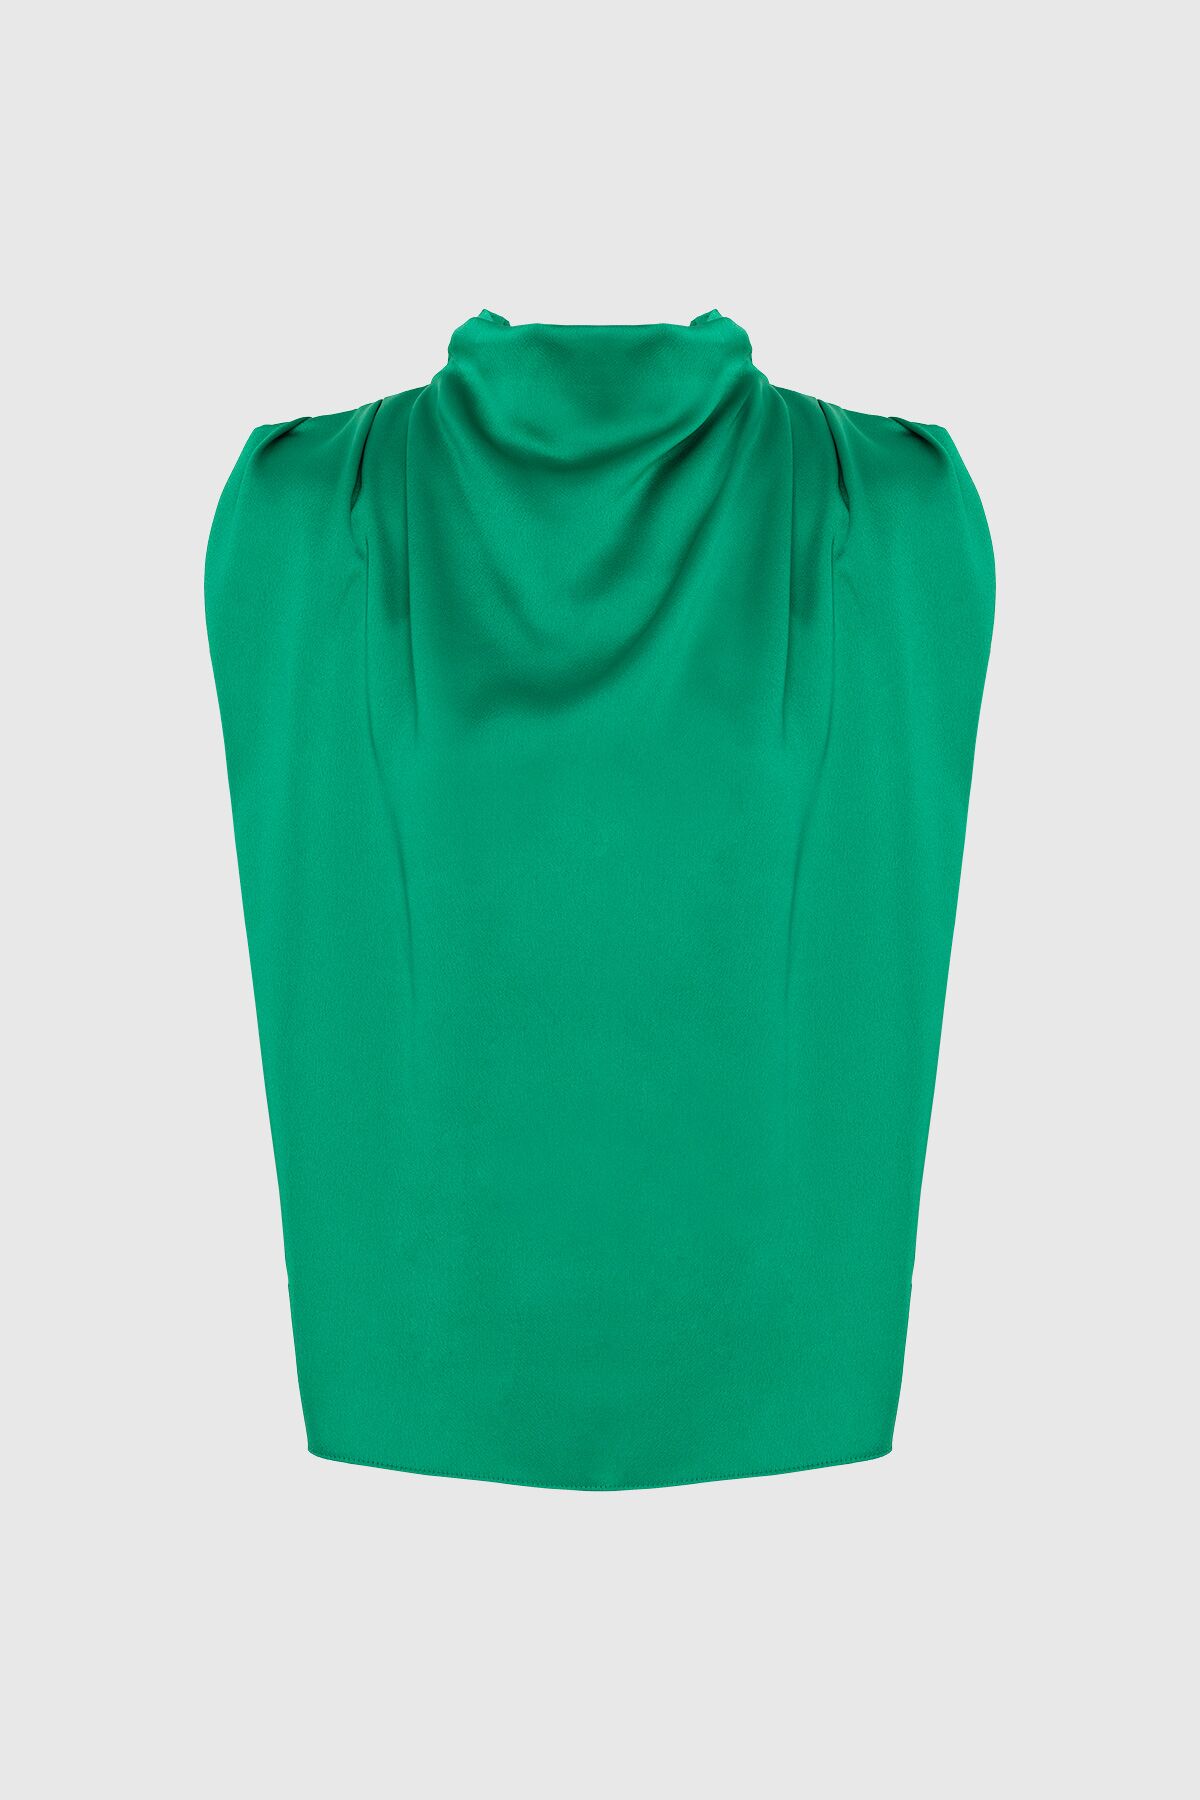 4G CLASSIC - Plunging Collar Zero Sleeve Green Blouse